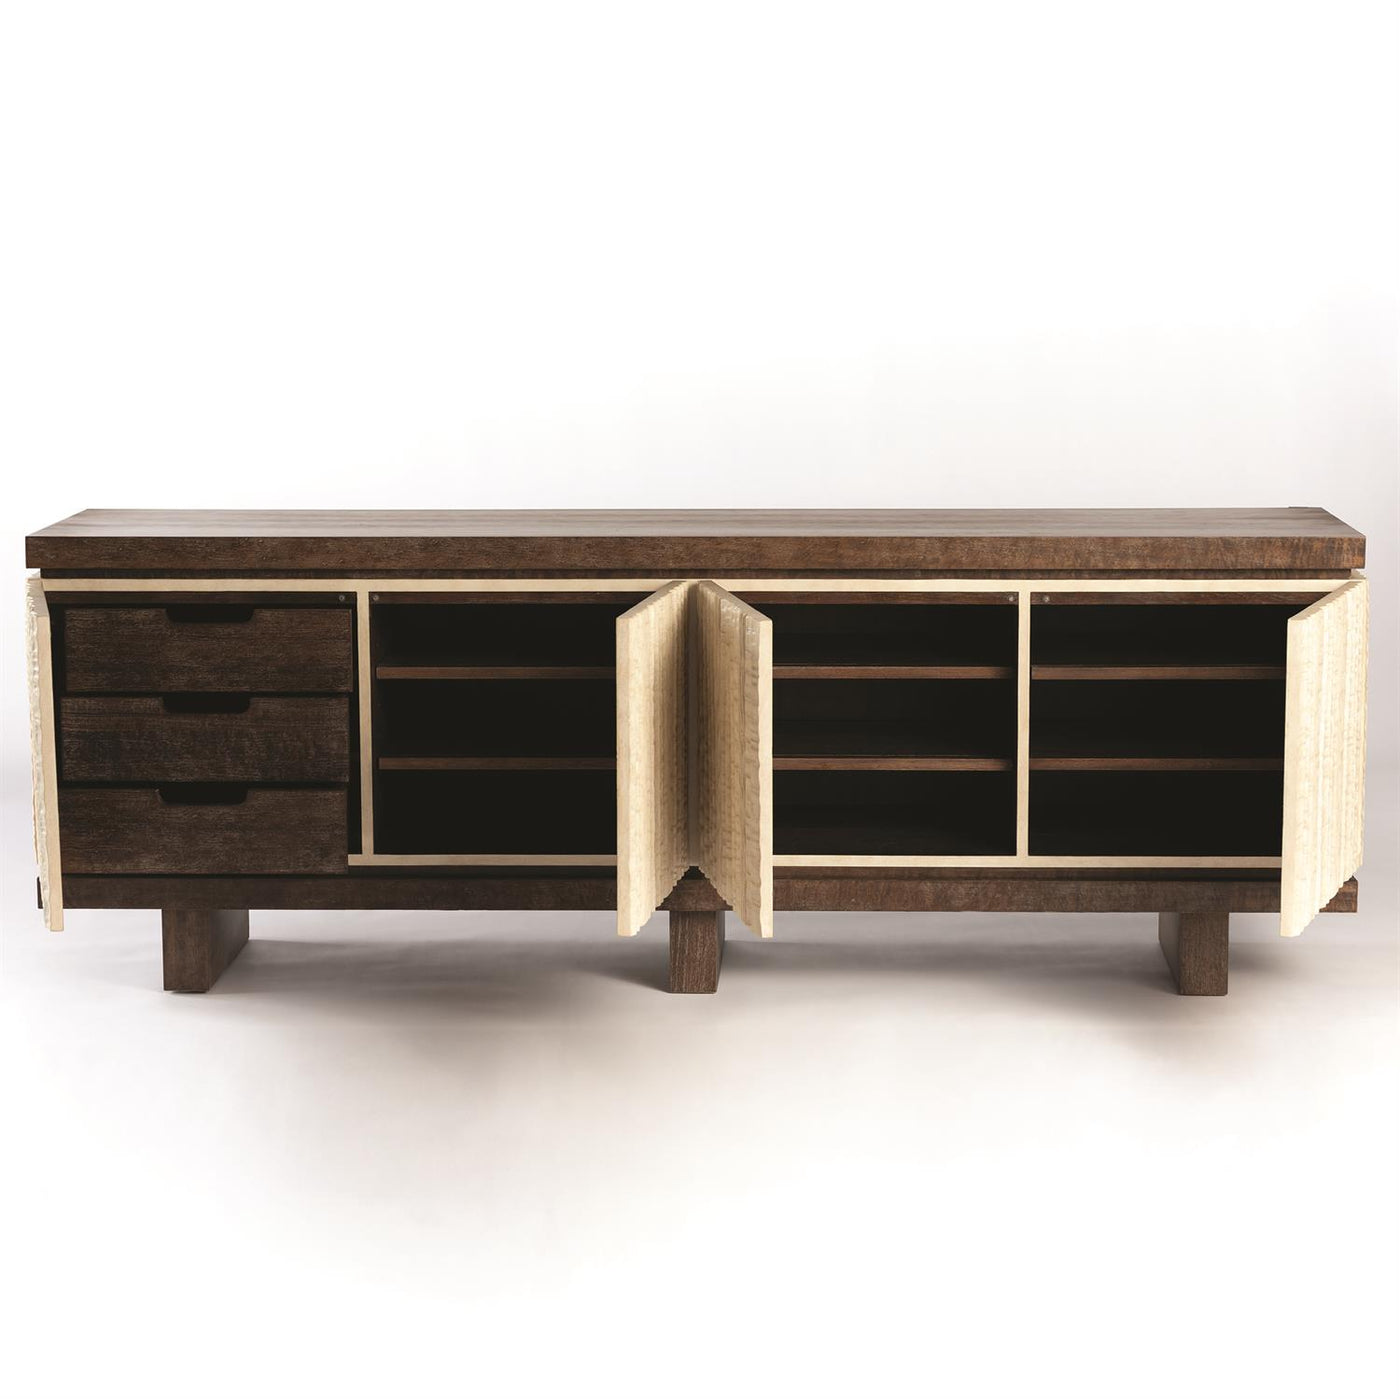 EMORY MEDIA CABINET by Global Views